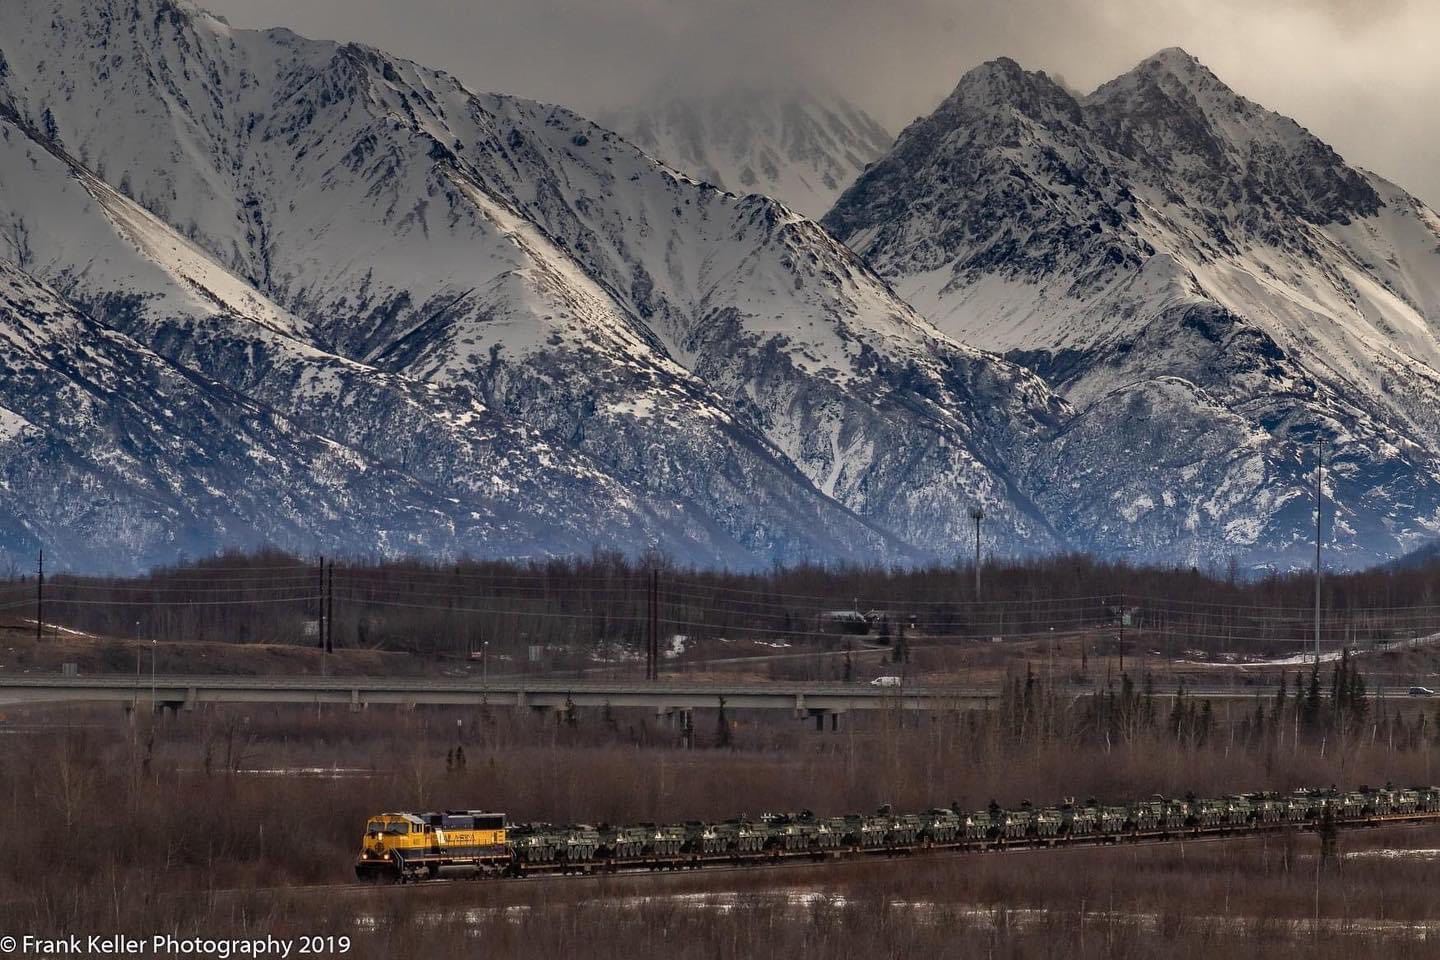 Delivering the Goods: Alaska Railroad moves a train of military vehicles north.